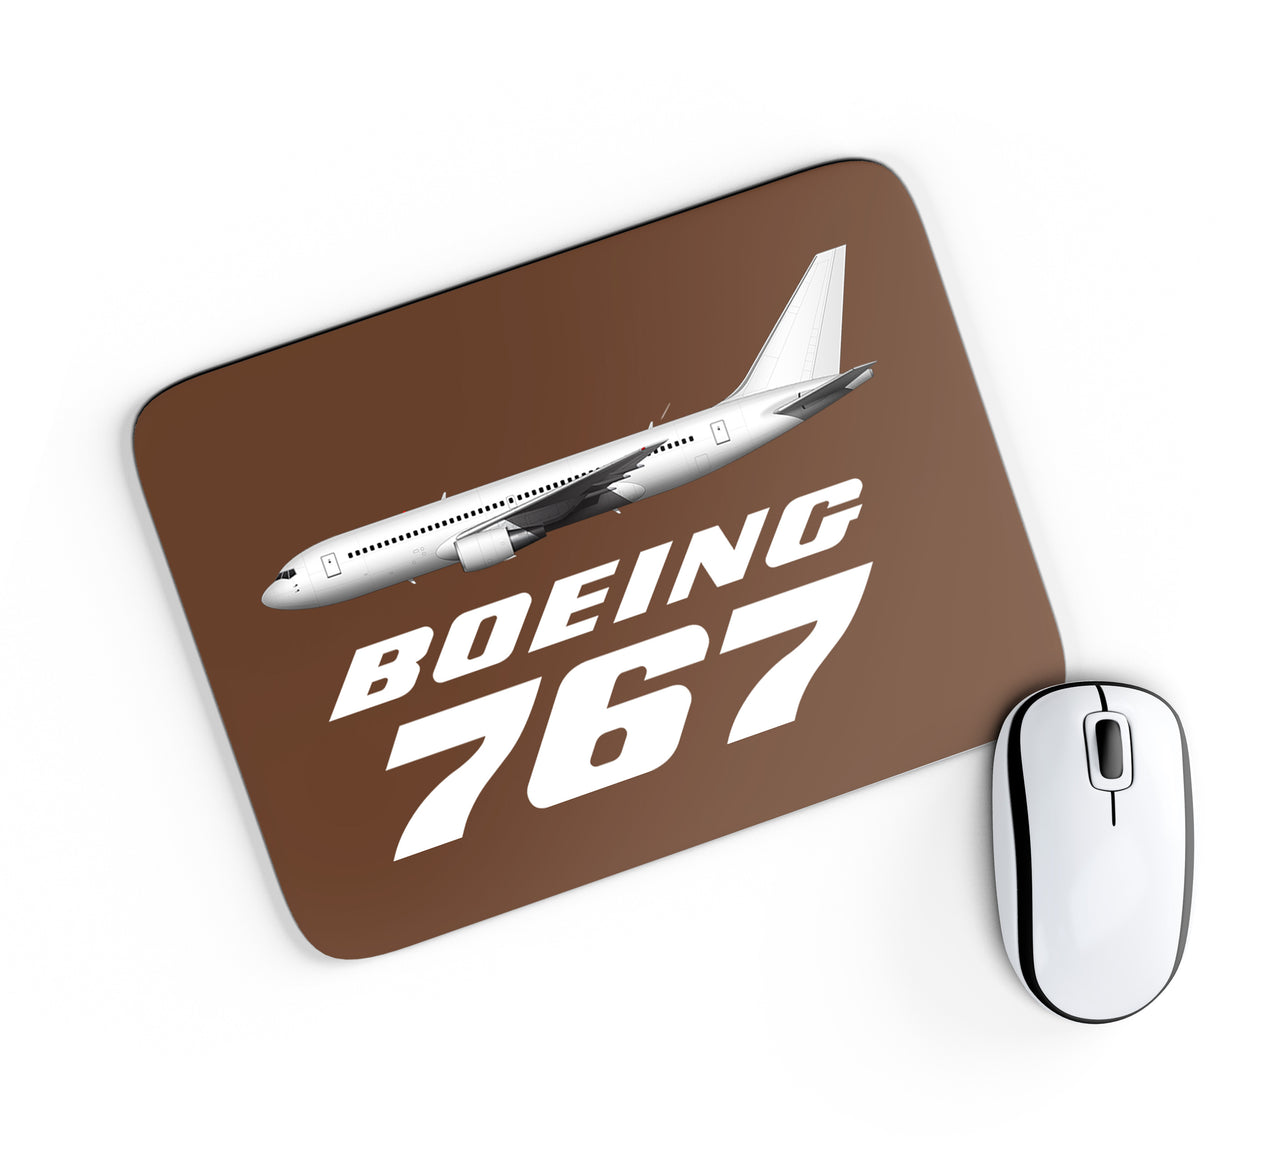 The Boeing 767 Designed Mouse Pads